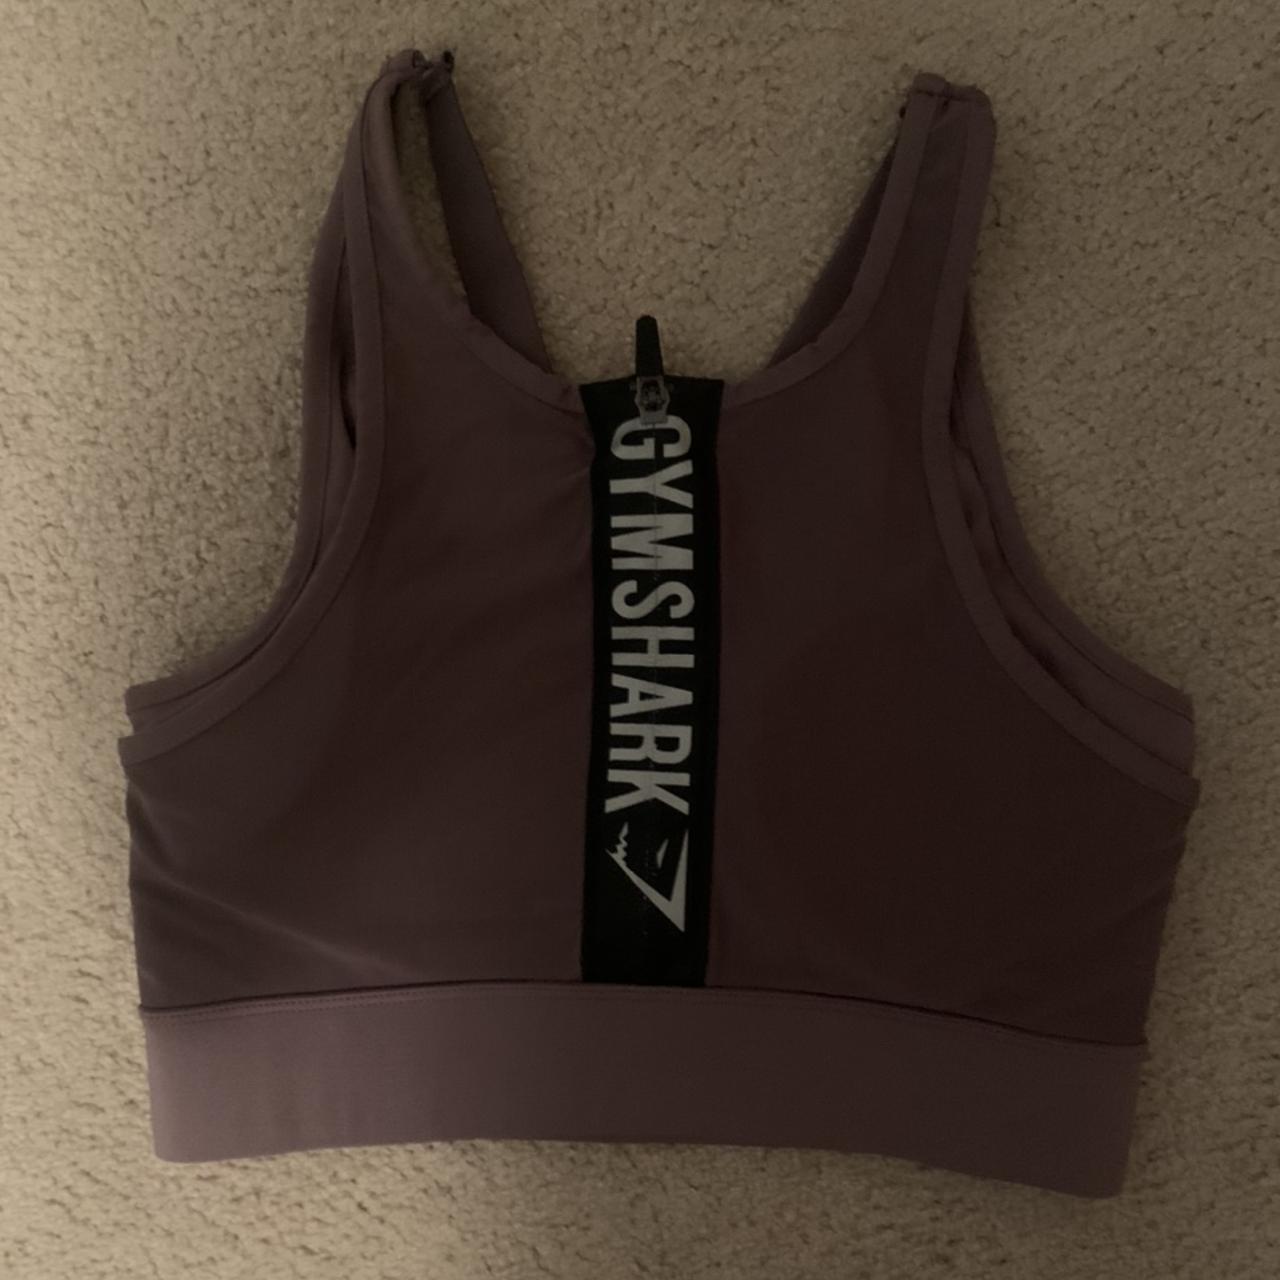 Size small gymshark sports bra. I bought this last - Depop